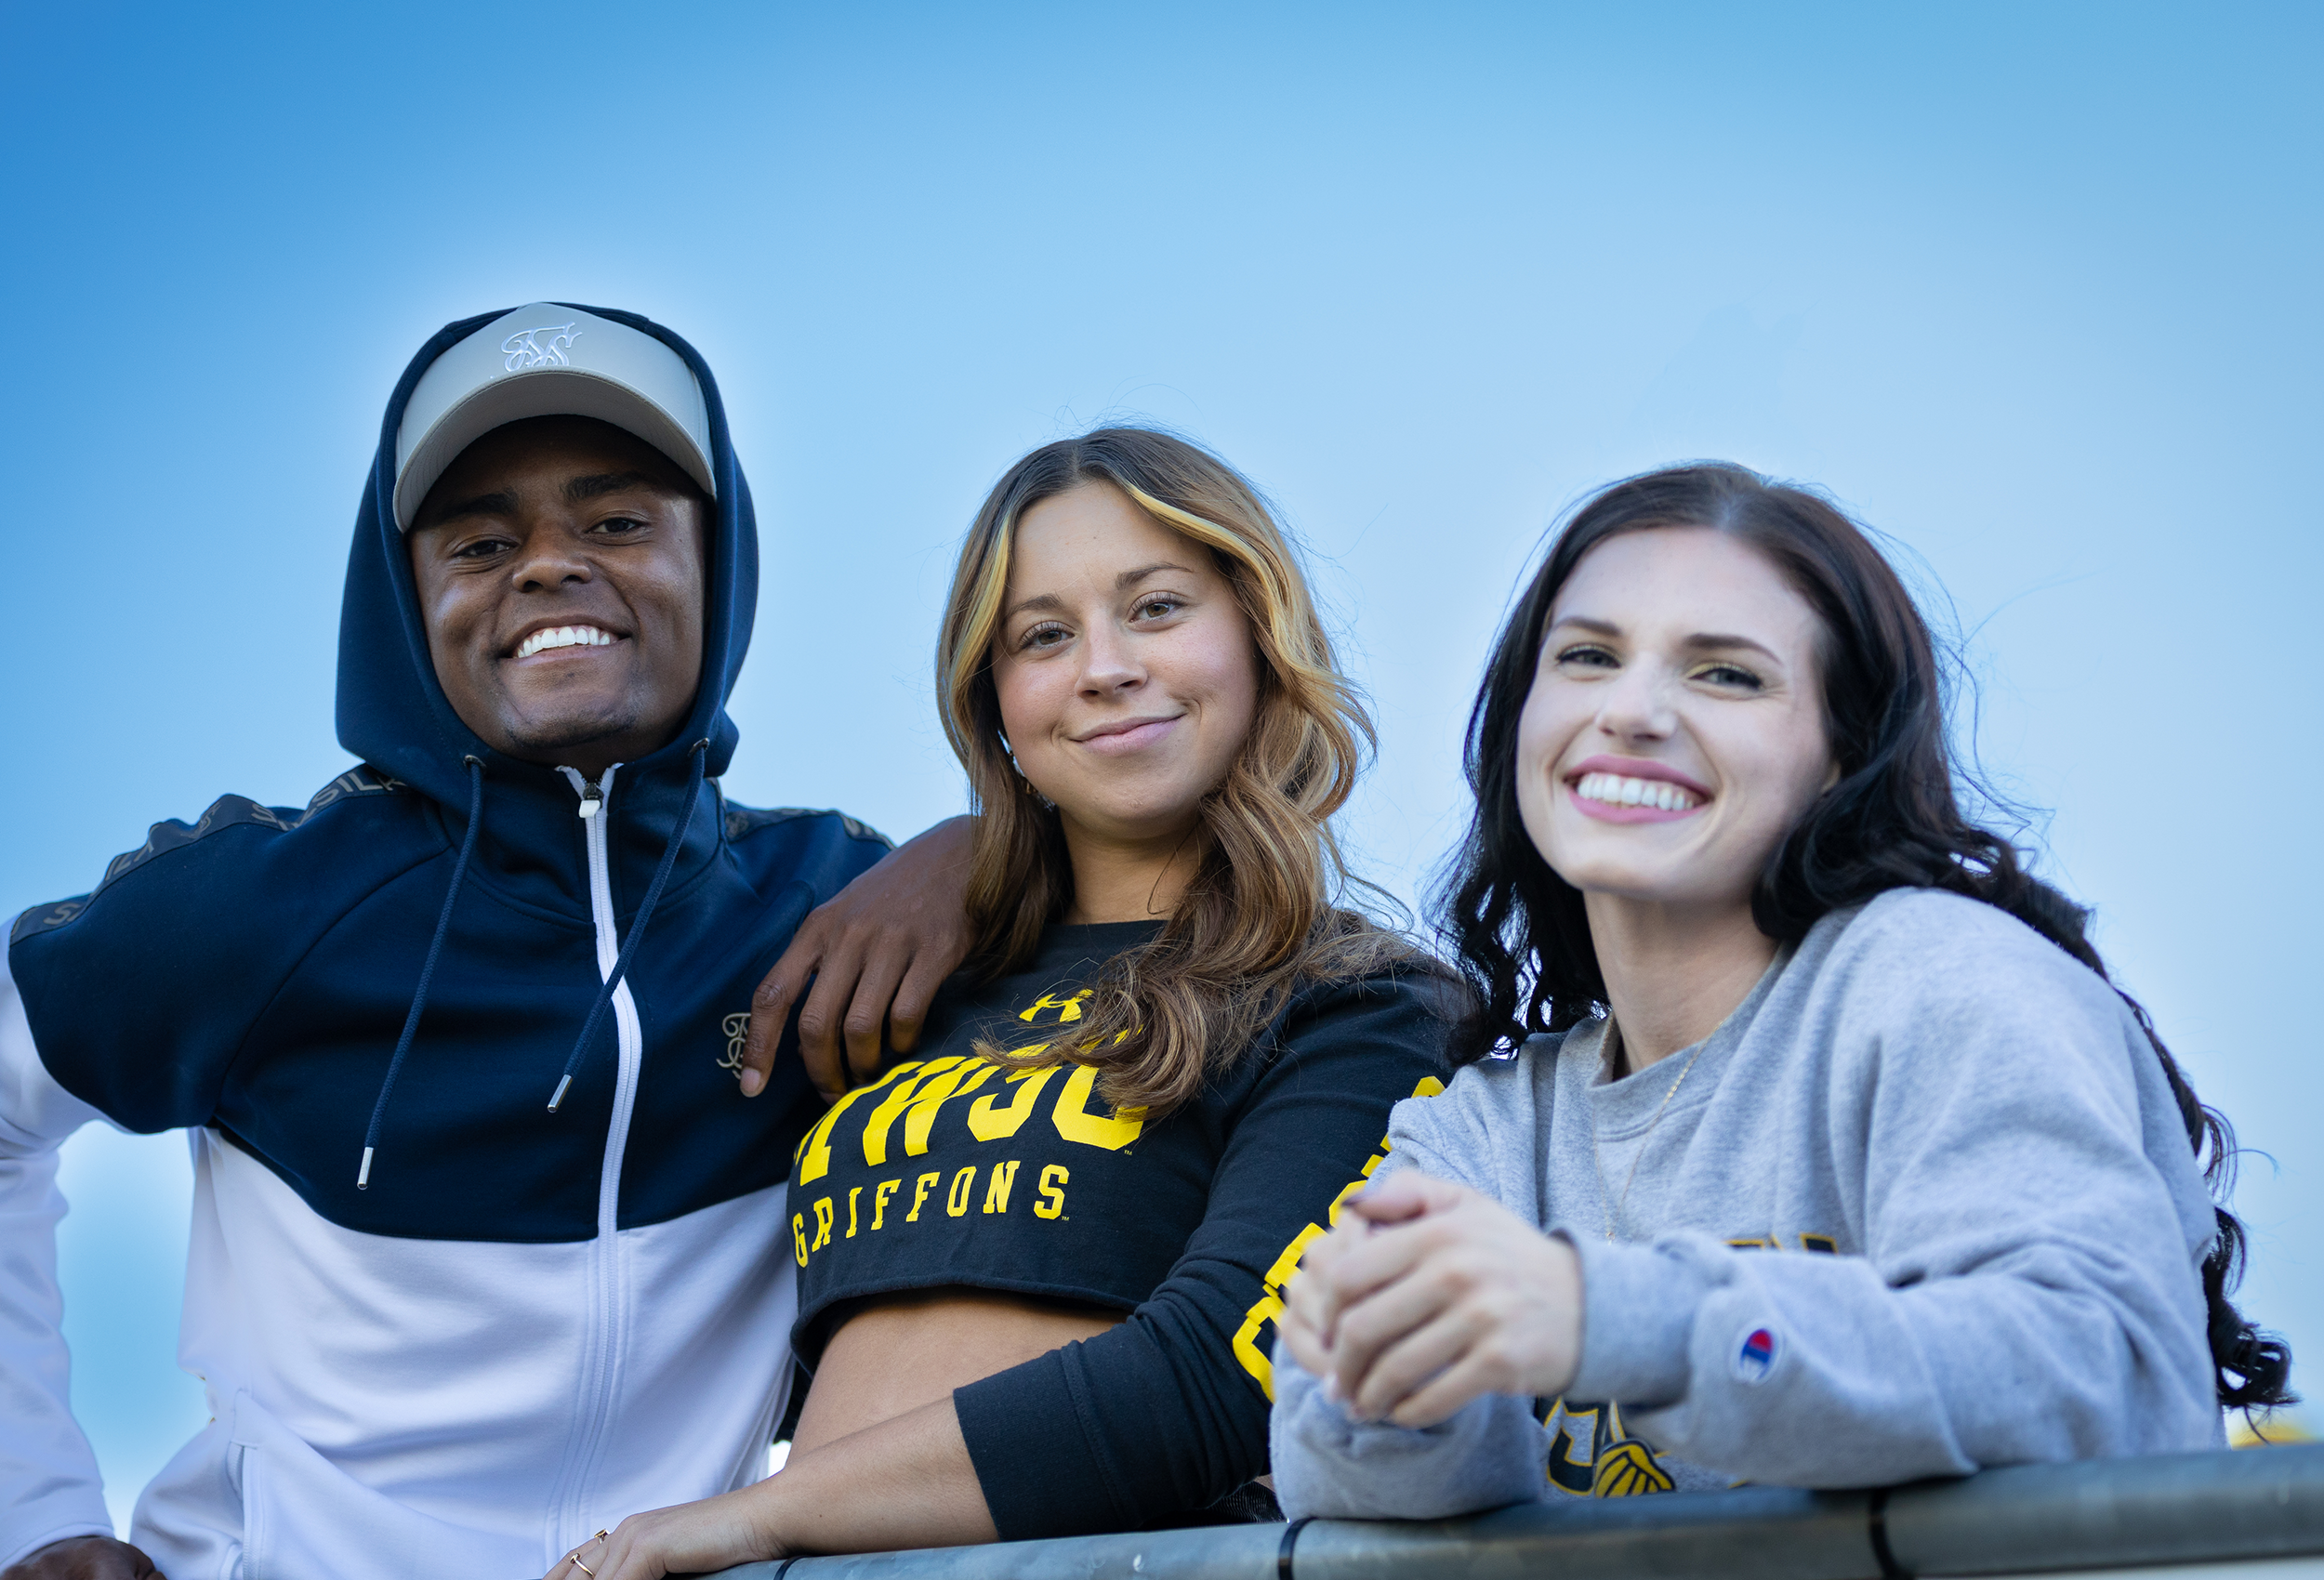 three students posing and smiling for the camera